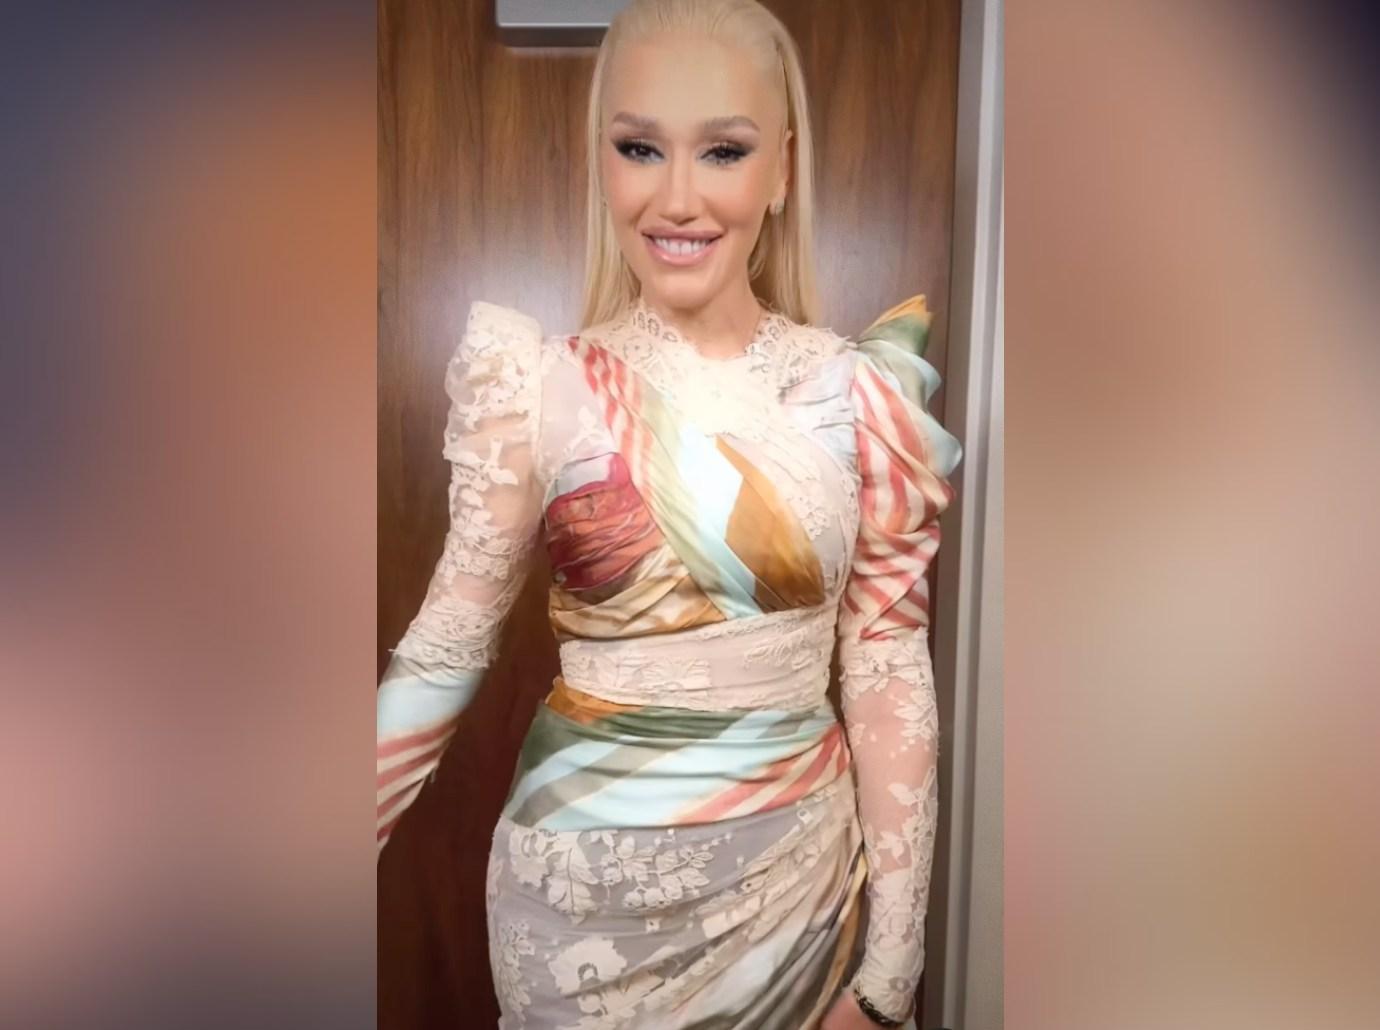 Gwen Stefani's Dress On 'The Voice' Gets Trolled By Social Media Users